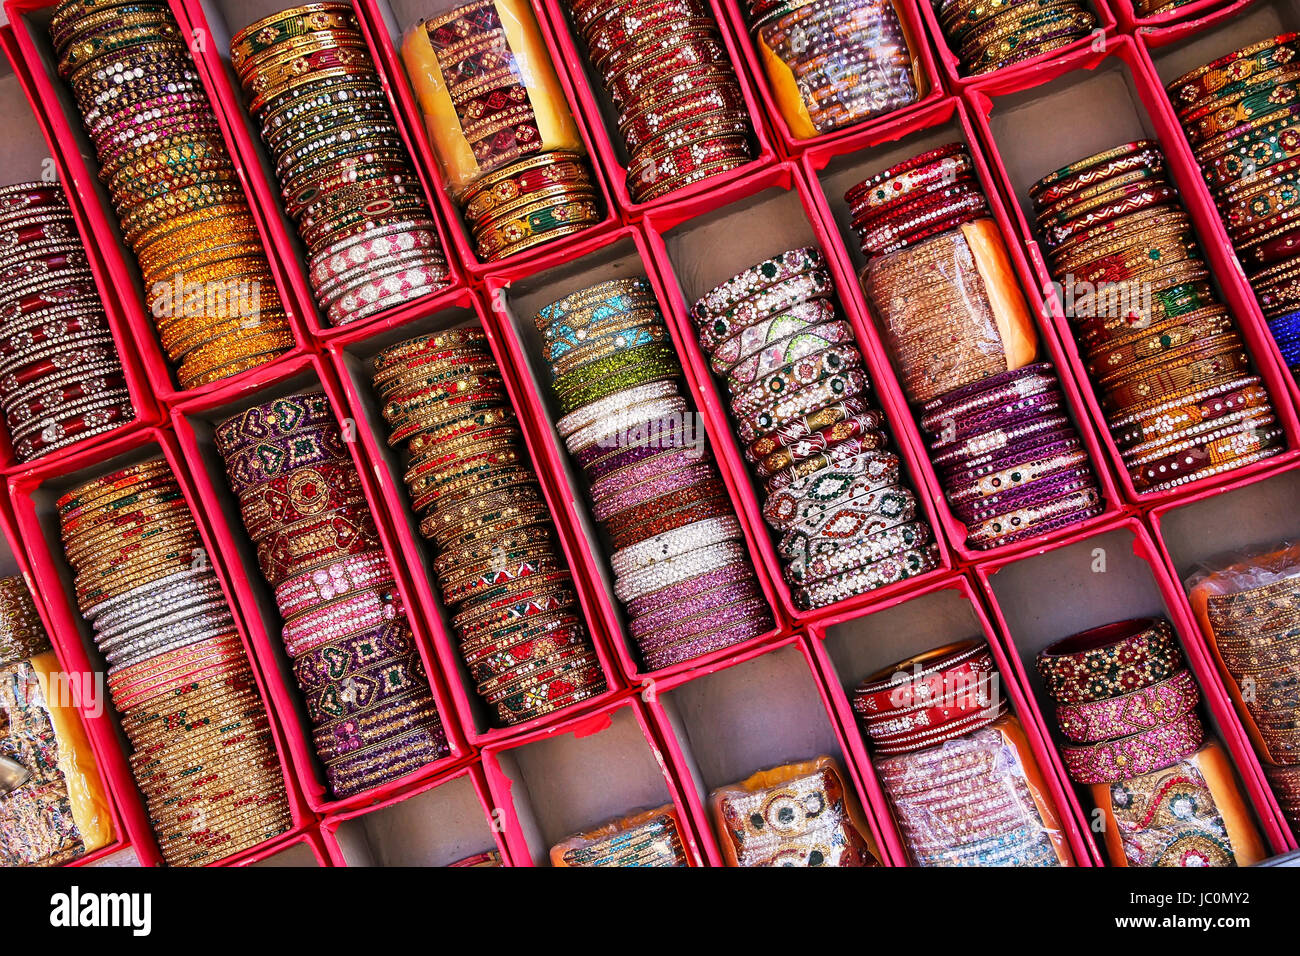 Display of colorful bangels inside City Palace in Jaipur, Rajasthan, India. Stock Photo